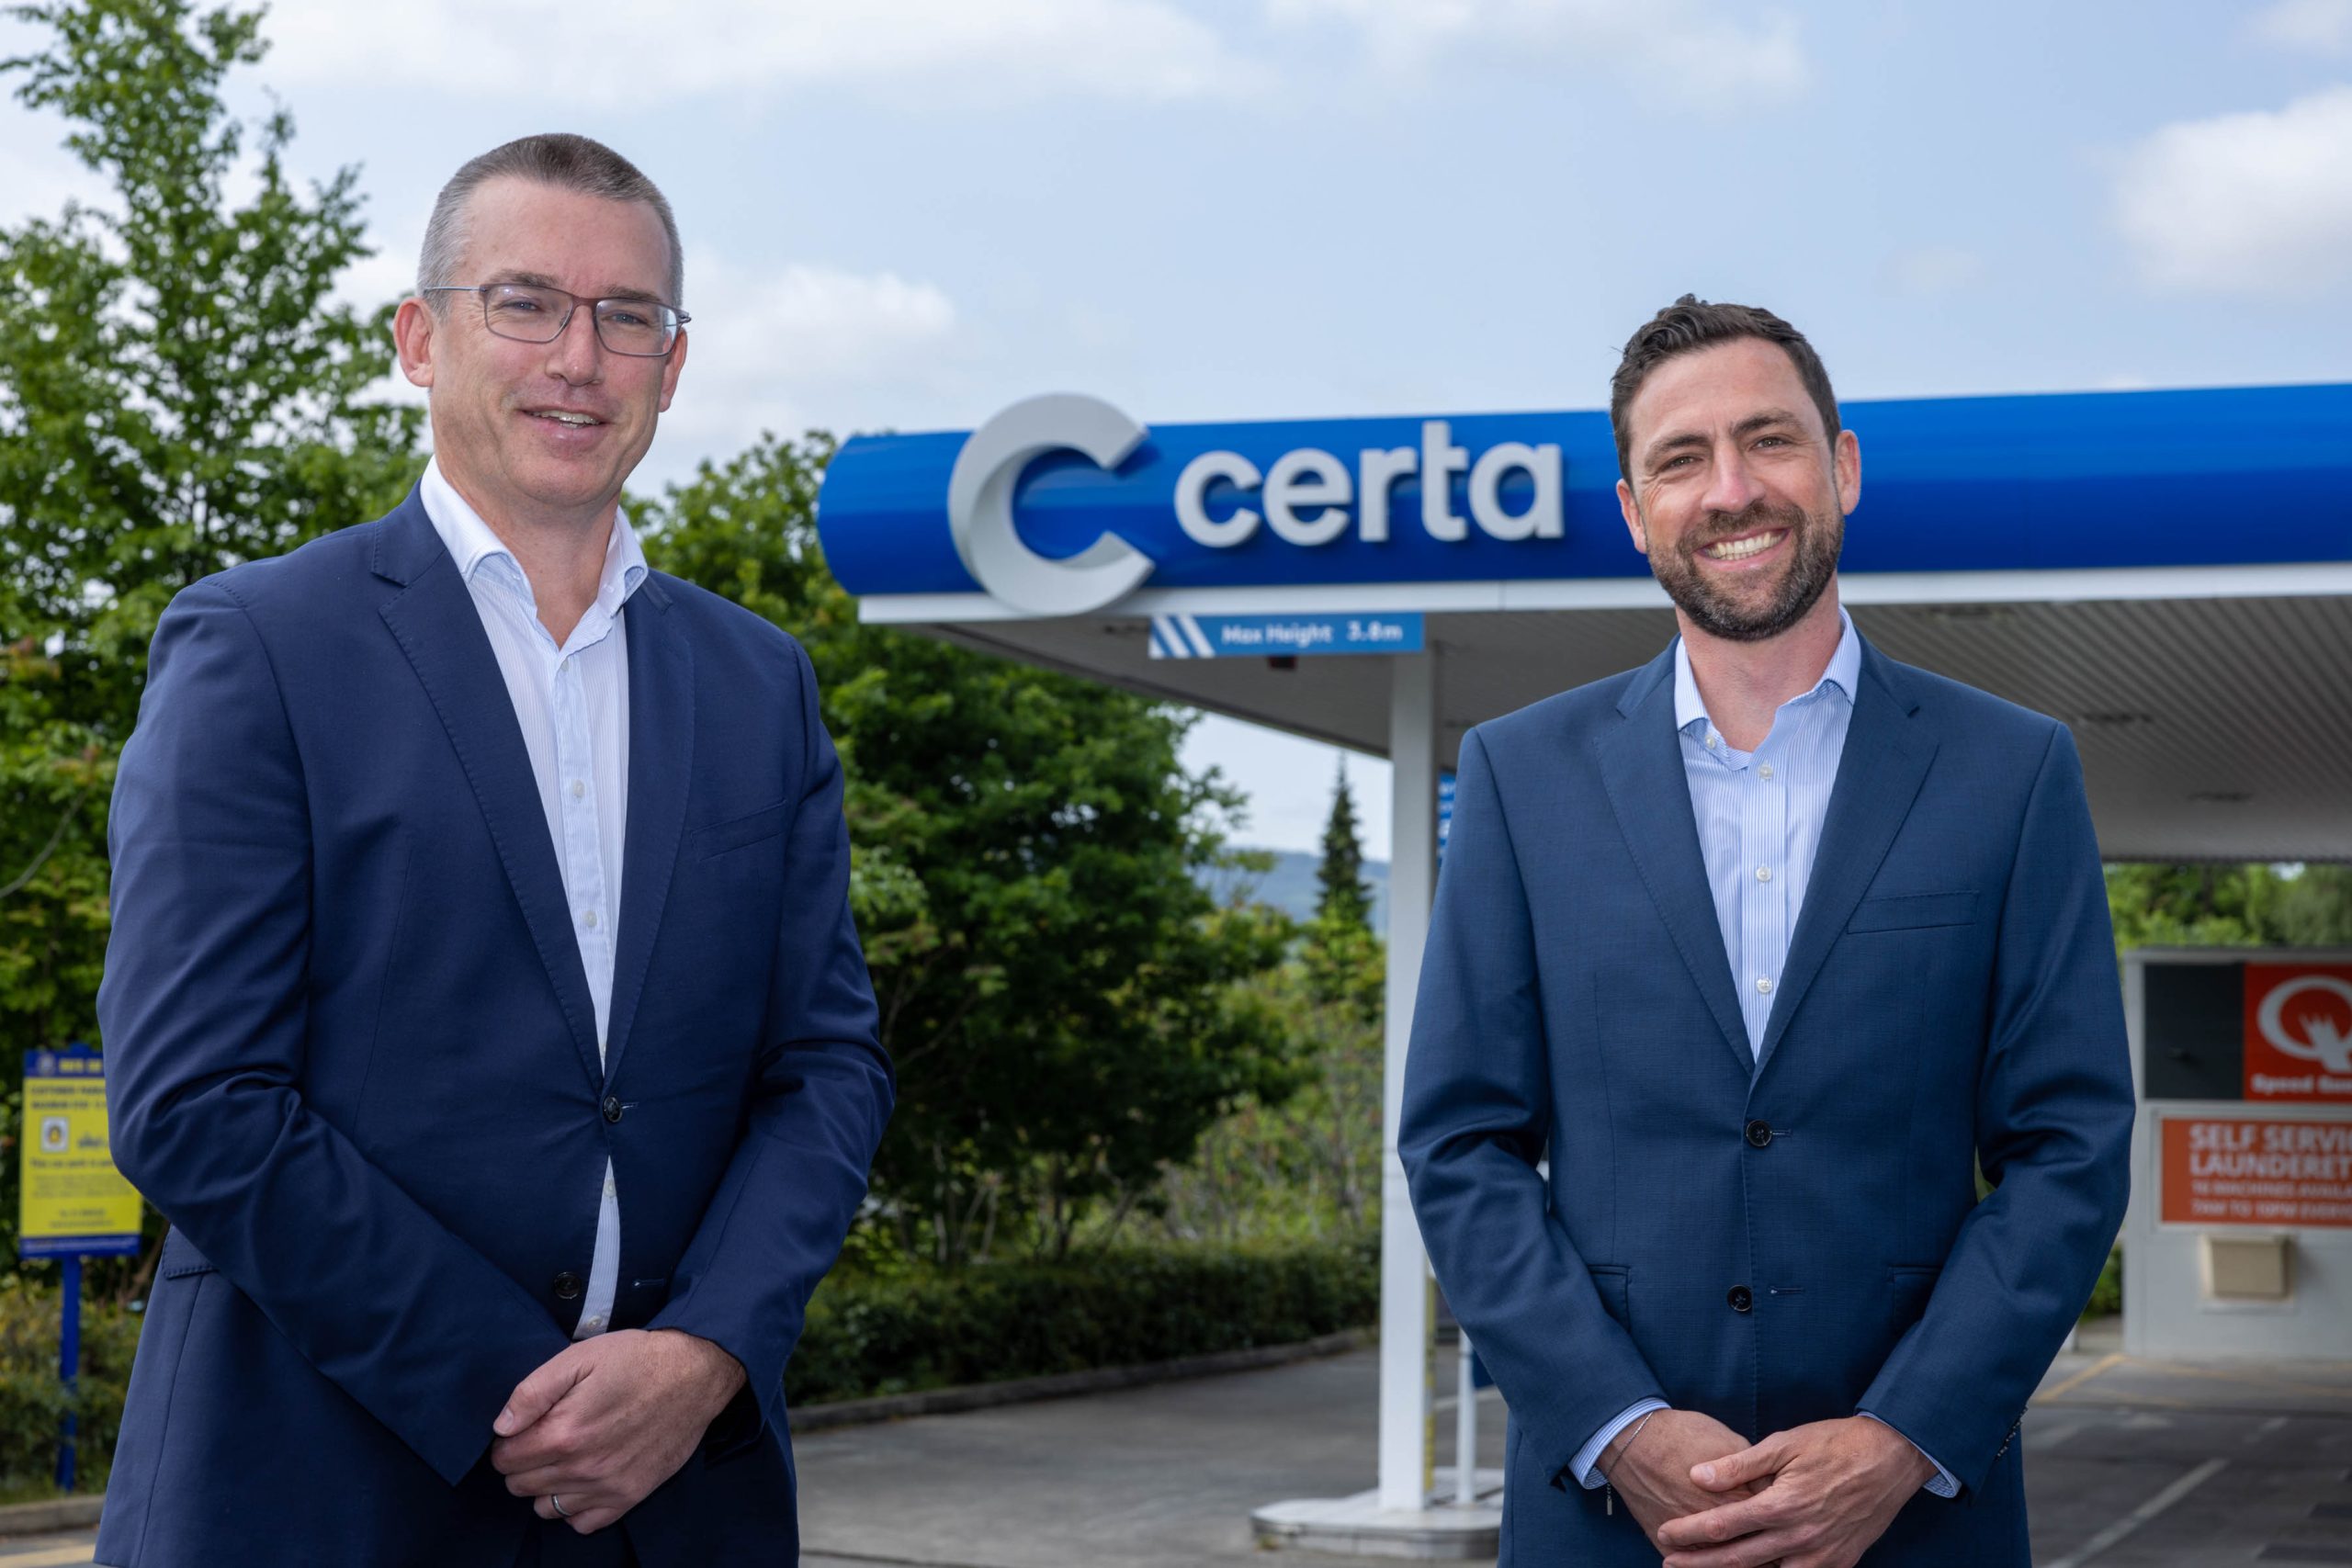 Certa – Leading by Example